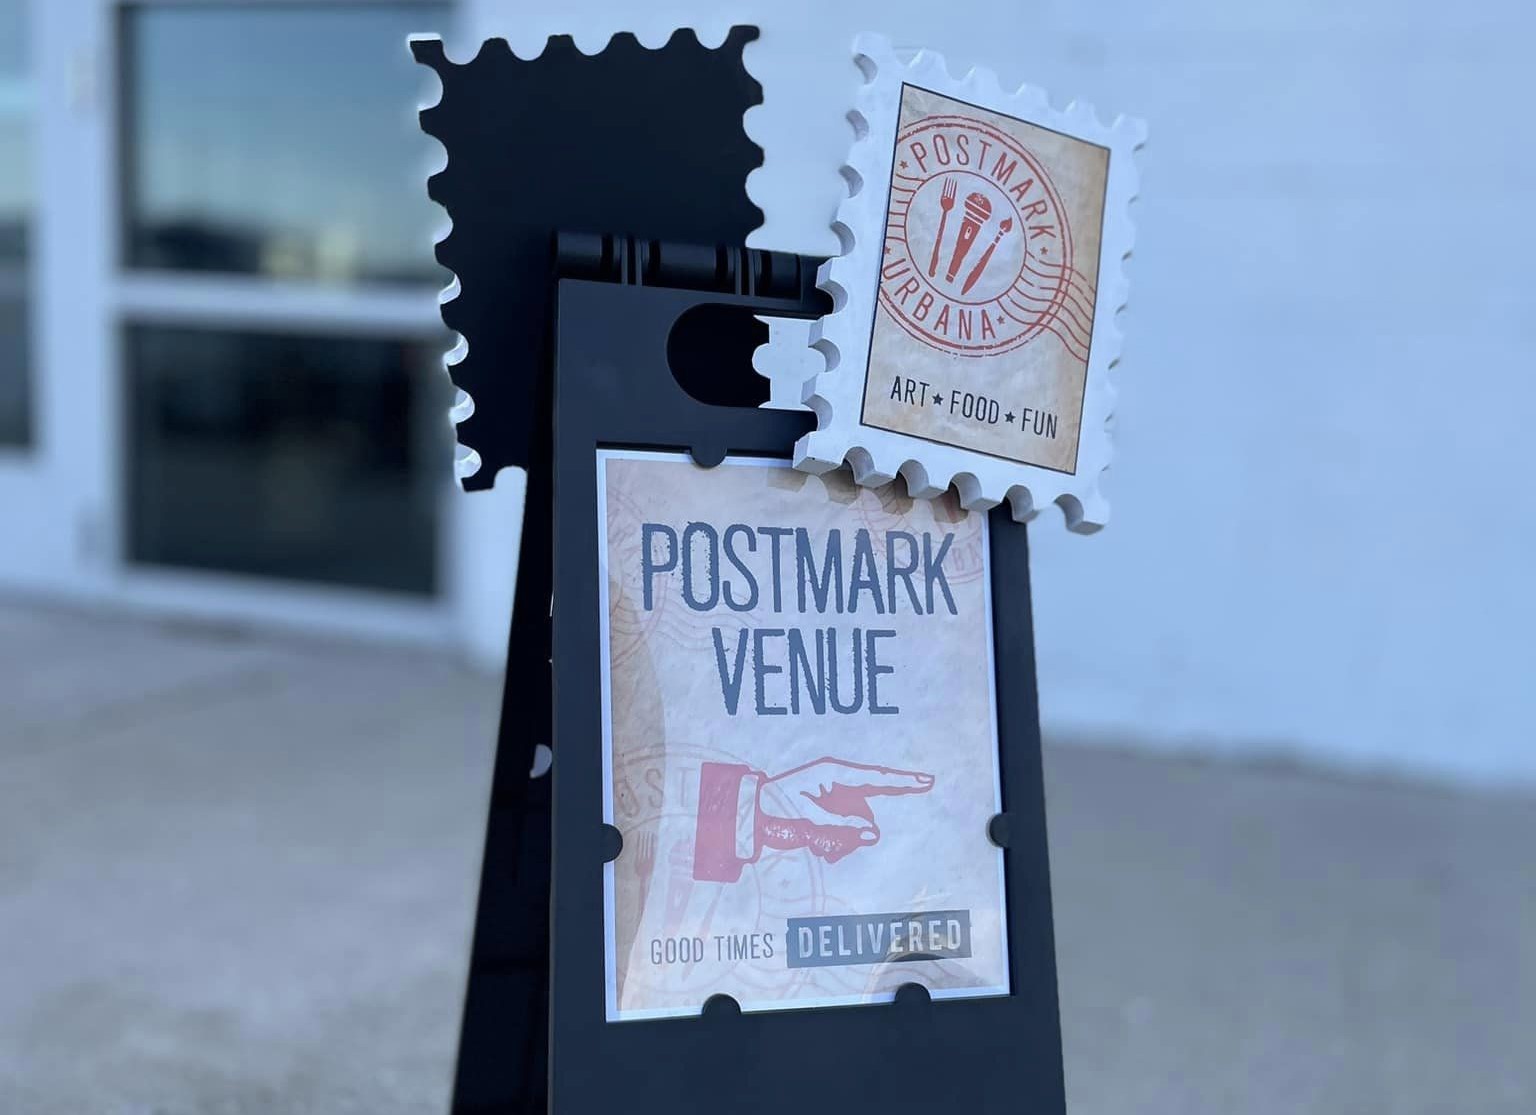 A black sandwich board with a sign that says PostMark Venue and a hand pointing to the right.